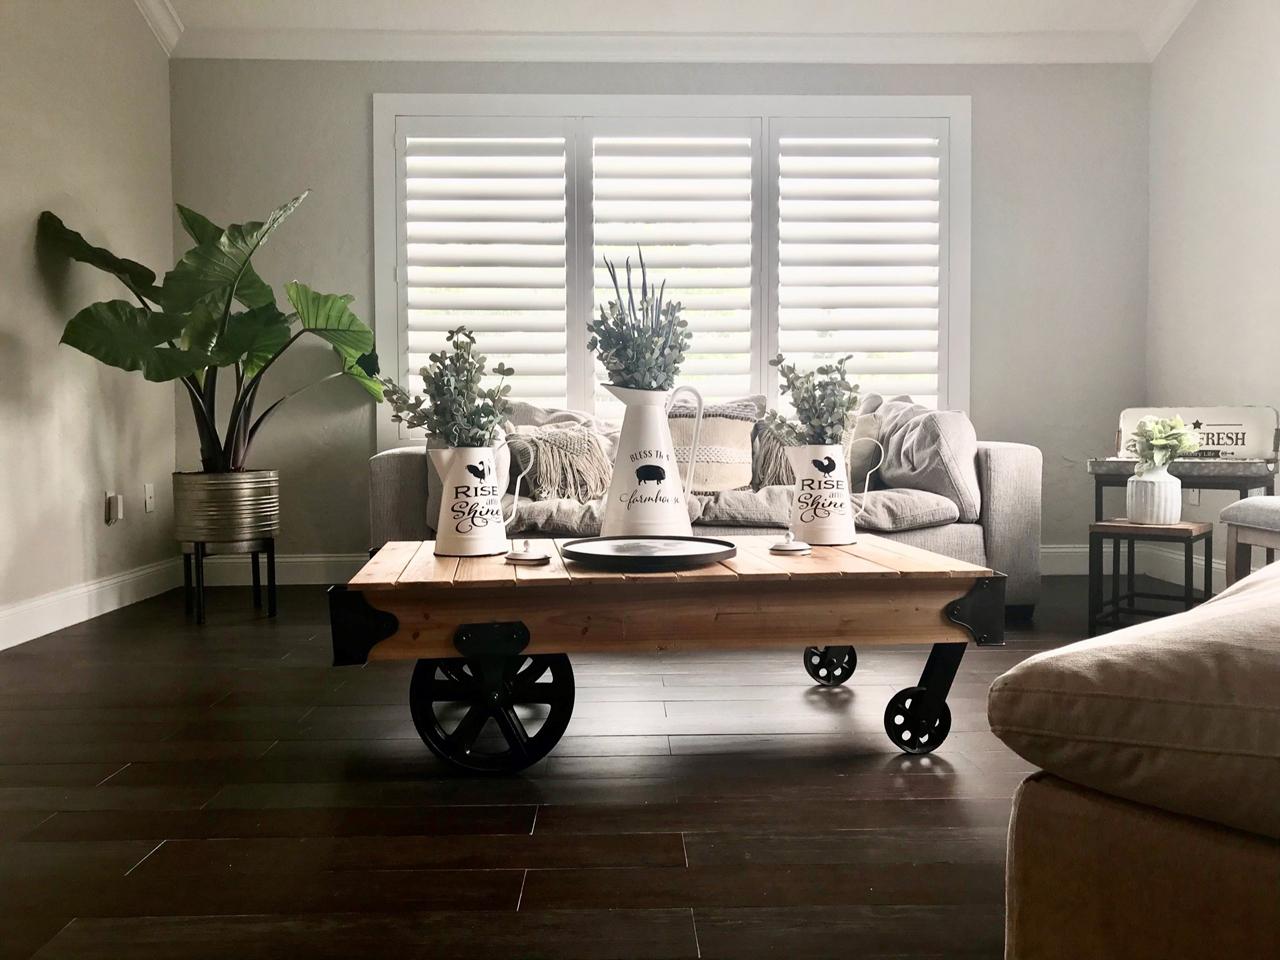 Living room with plantation shutters